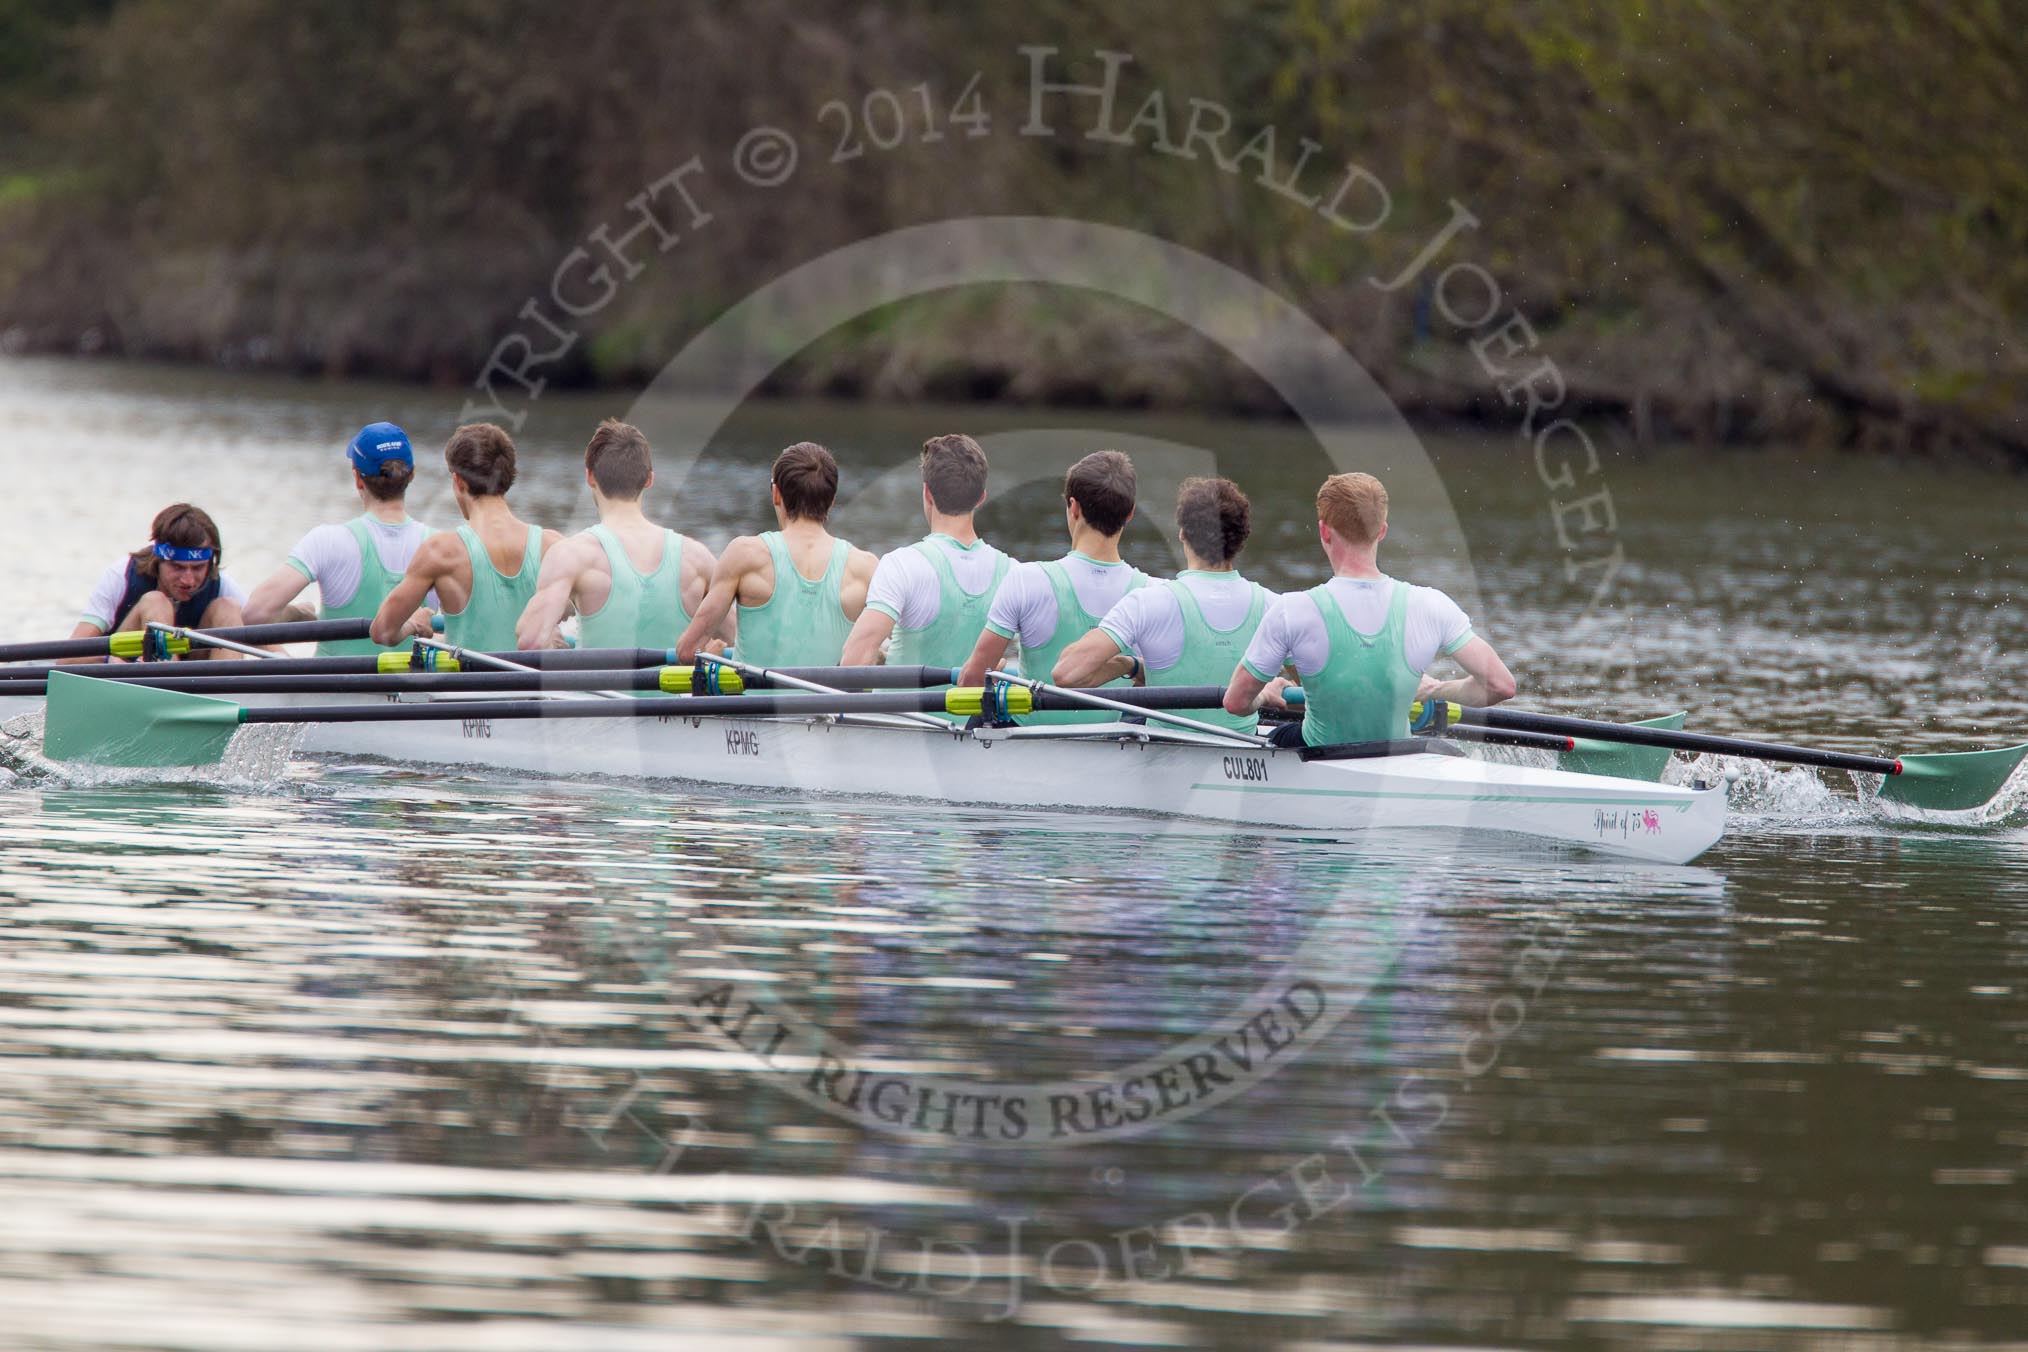 The Women's Boat Race and Henley Boat Races 2014: The Lightweight Men's Boat Race - OULRC vs CULRC, Cambridge is leading: Cox Callum Mantell, stroke Andrzej Hunt, 7 Giovanni Bergamo Andreis, 6 Will Hayes, 5 Nikodem Szumilo, 4 Andrei Lebed, 3 James Green, 2 Emanuel Malek, bow Greg Street..
River Thames,
Henley-on-Thames,
Buckinghamshire,
United Kingdom,
on 30 March 2014 at 15:40, image #369